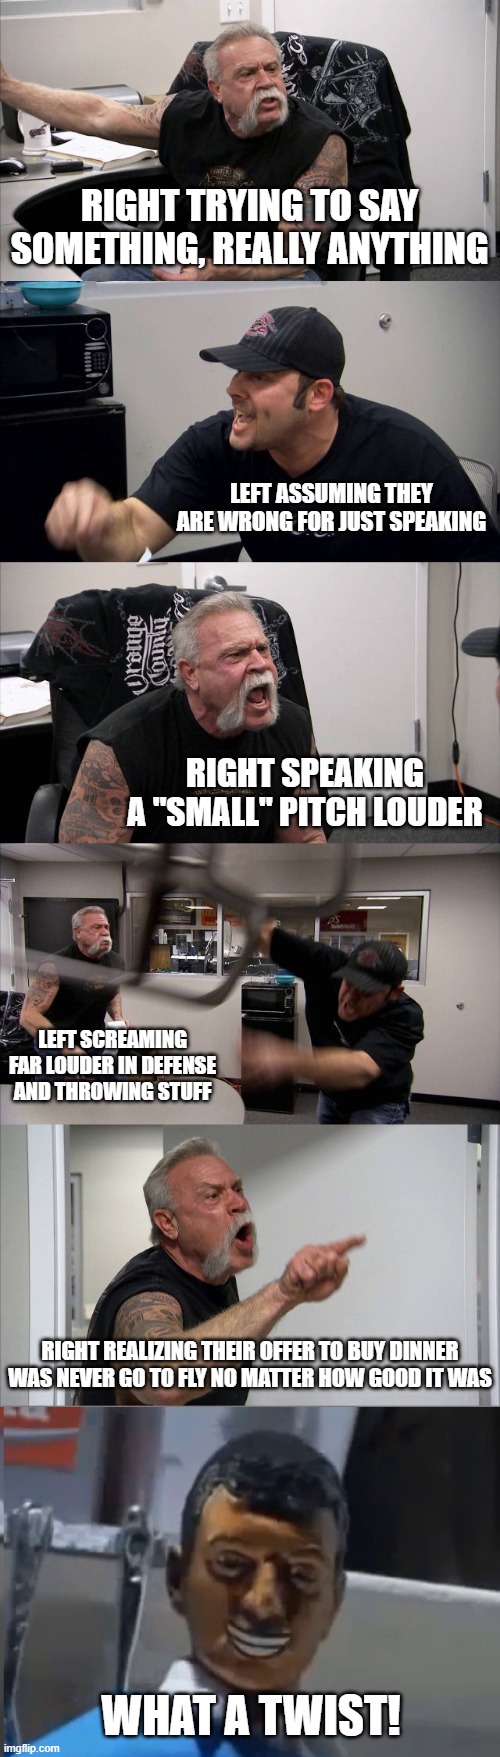 Really, I find both sides hilarious sometimes | RIGHT TRYING TO SAY SOMETHING, REALLY ANYTHING; LEFT ASSUMING THEY ARE WRONG FOR JUST SPEAKING; RIGHT SPEAKING A "SMALL" PITCH LOUDER; LEFT SCREAMING FAR LOUDER IN DEFENSE AND THROWING STUFF; RIGHT REALIZING THEIR OFFER TO BUY DINNER WAS NEVER GO TO FLY NO MATTER HOW GOOD IT WAS; WHAT A TWIST! | image tagged in memes,american chopper argument | made w/ Imgflip meme maker